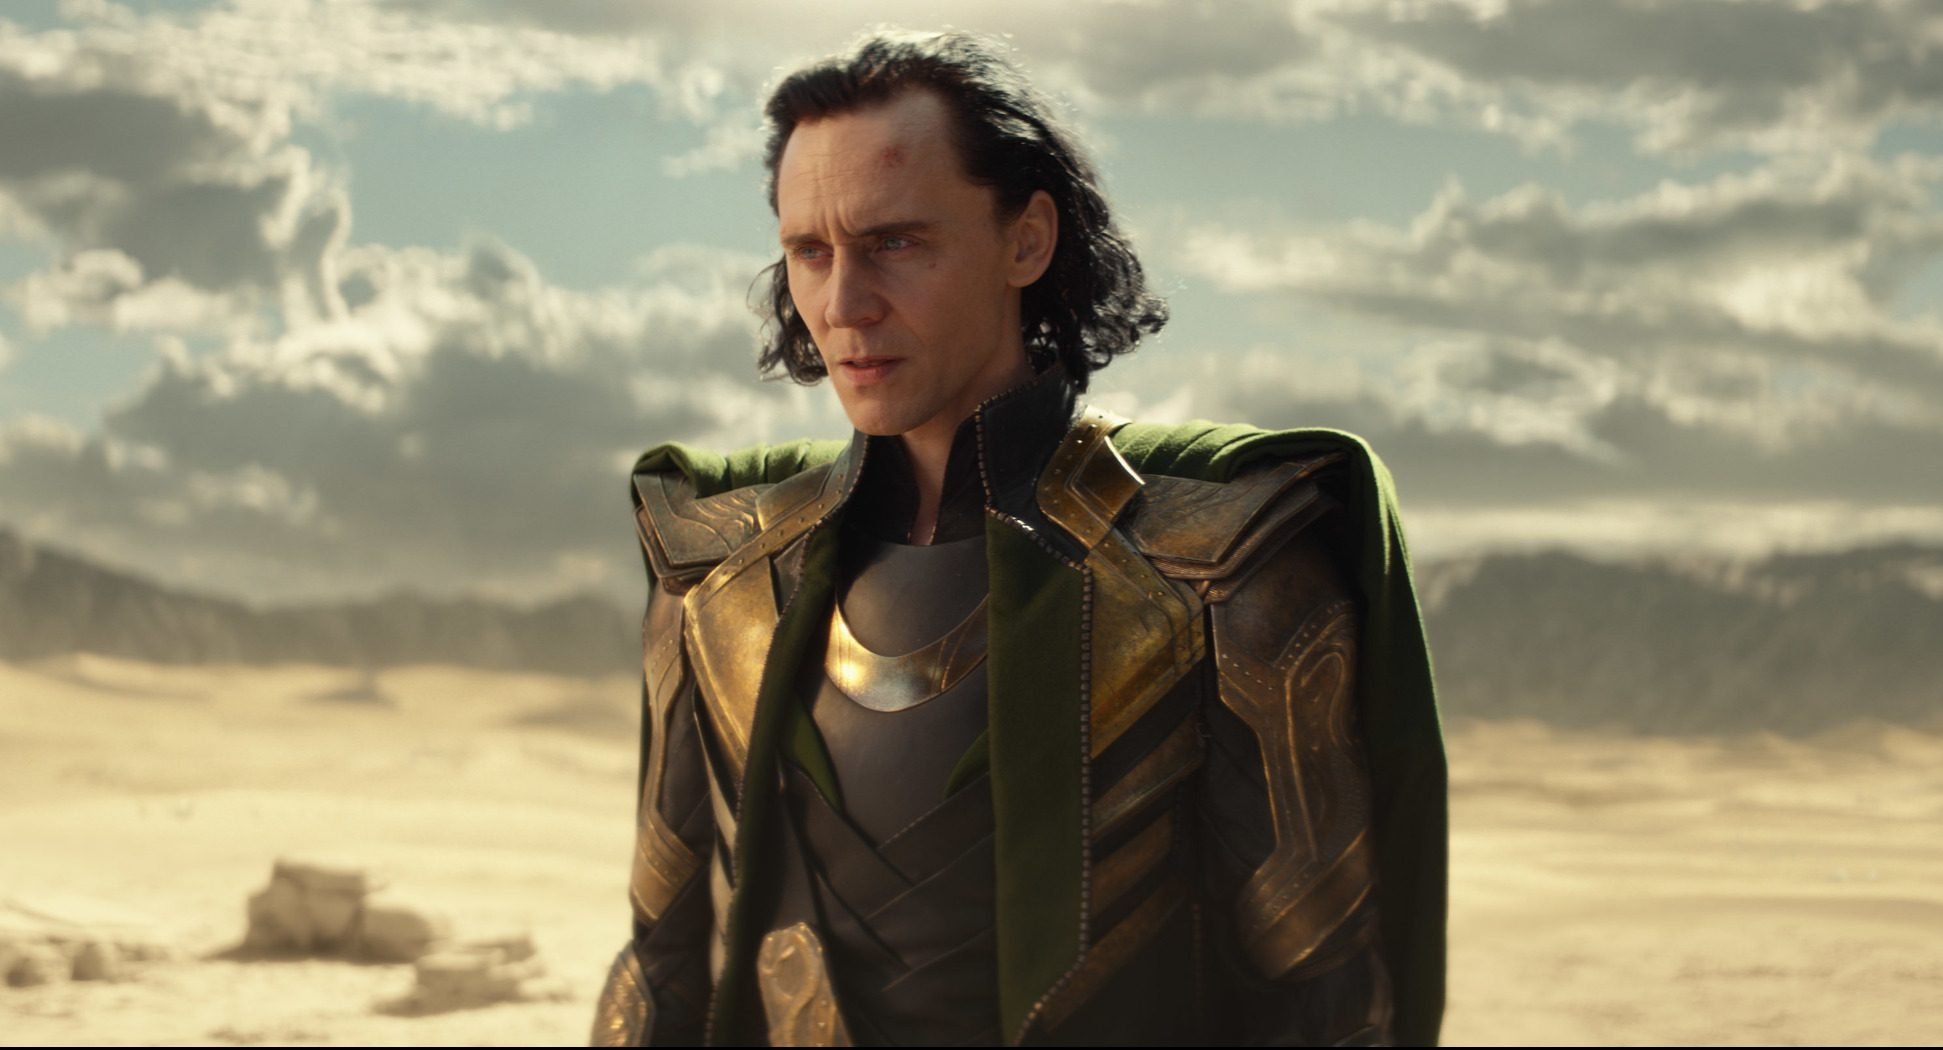 Tom Hiddleston in 'Loki' - He's standing in a desert landscape during the show's first episode